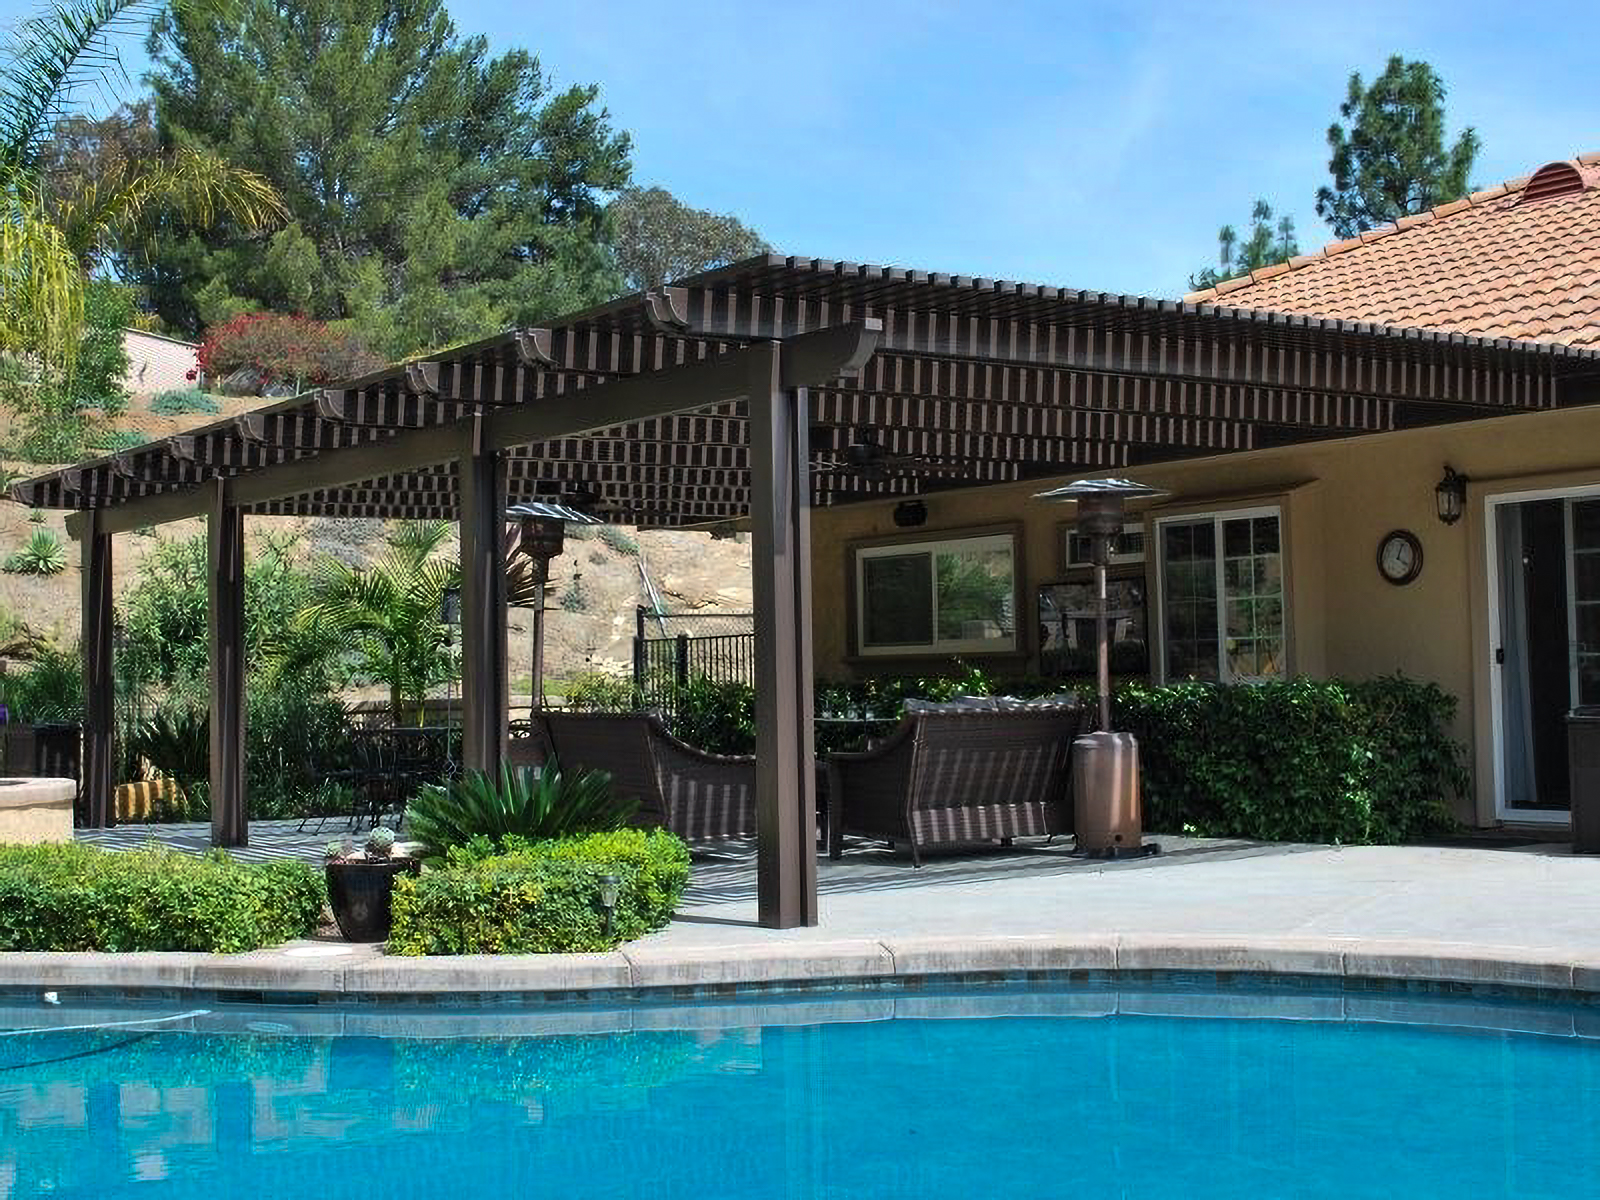 Traditional Style Lattice Patio Cover over an outdoor sitting area with furniture by a pool in a backyard of a San Diego California home